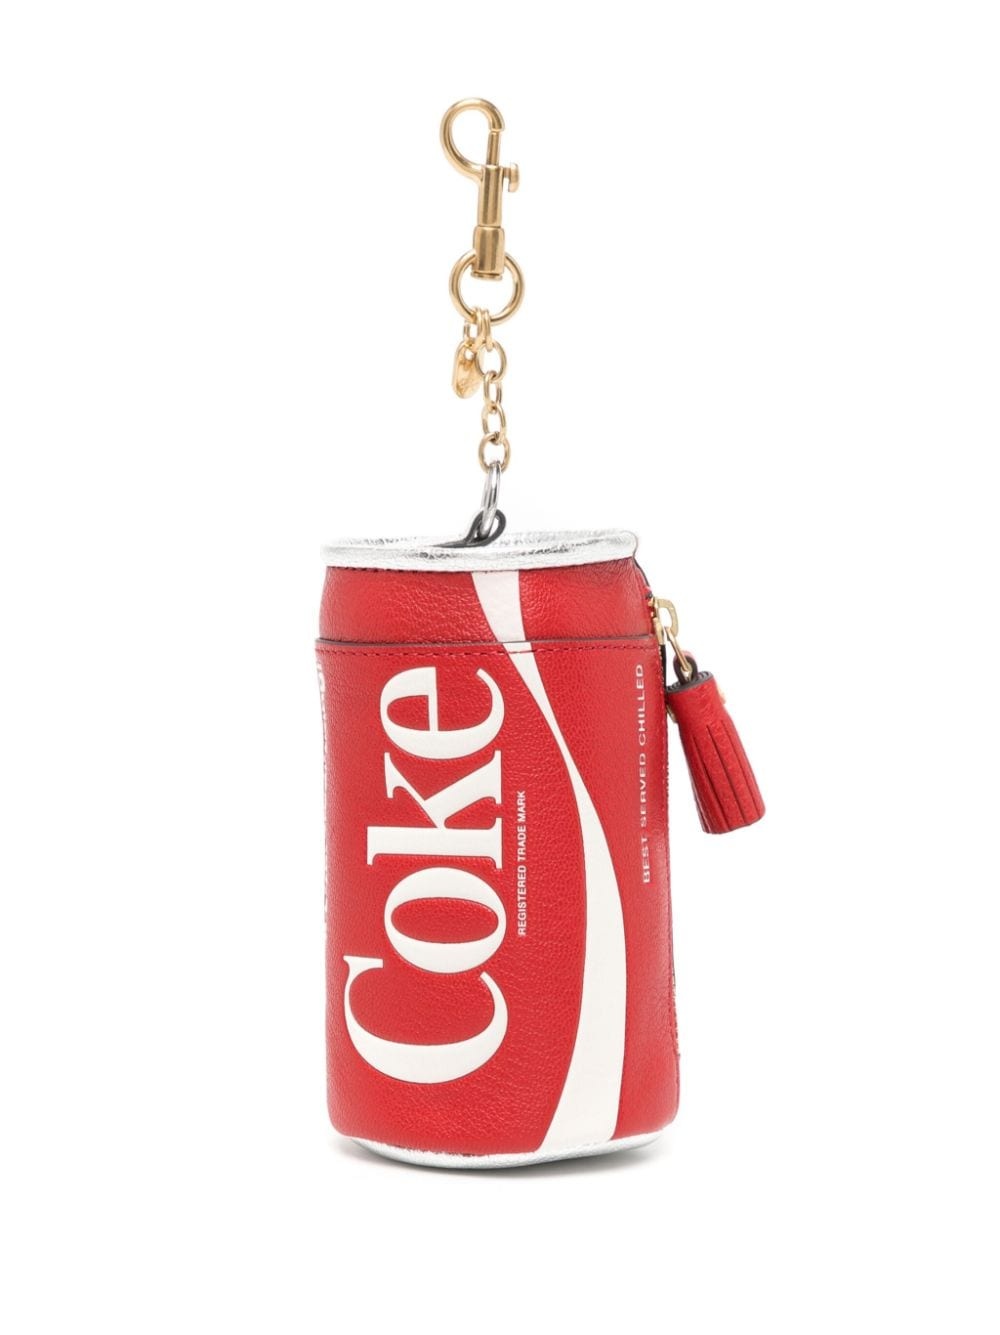 Anya Hindmarch Coca Cola leather coin purse